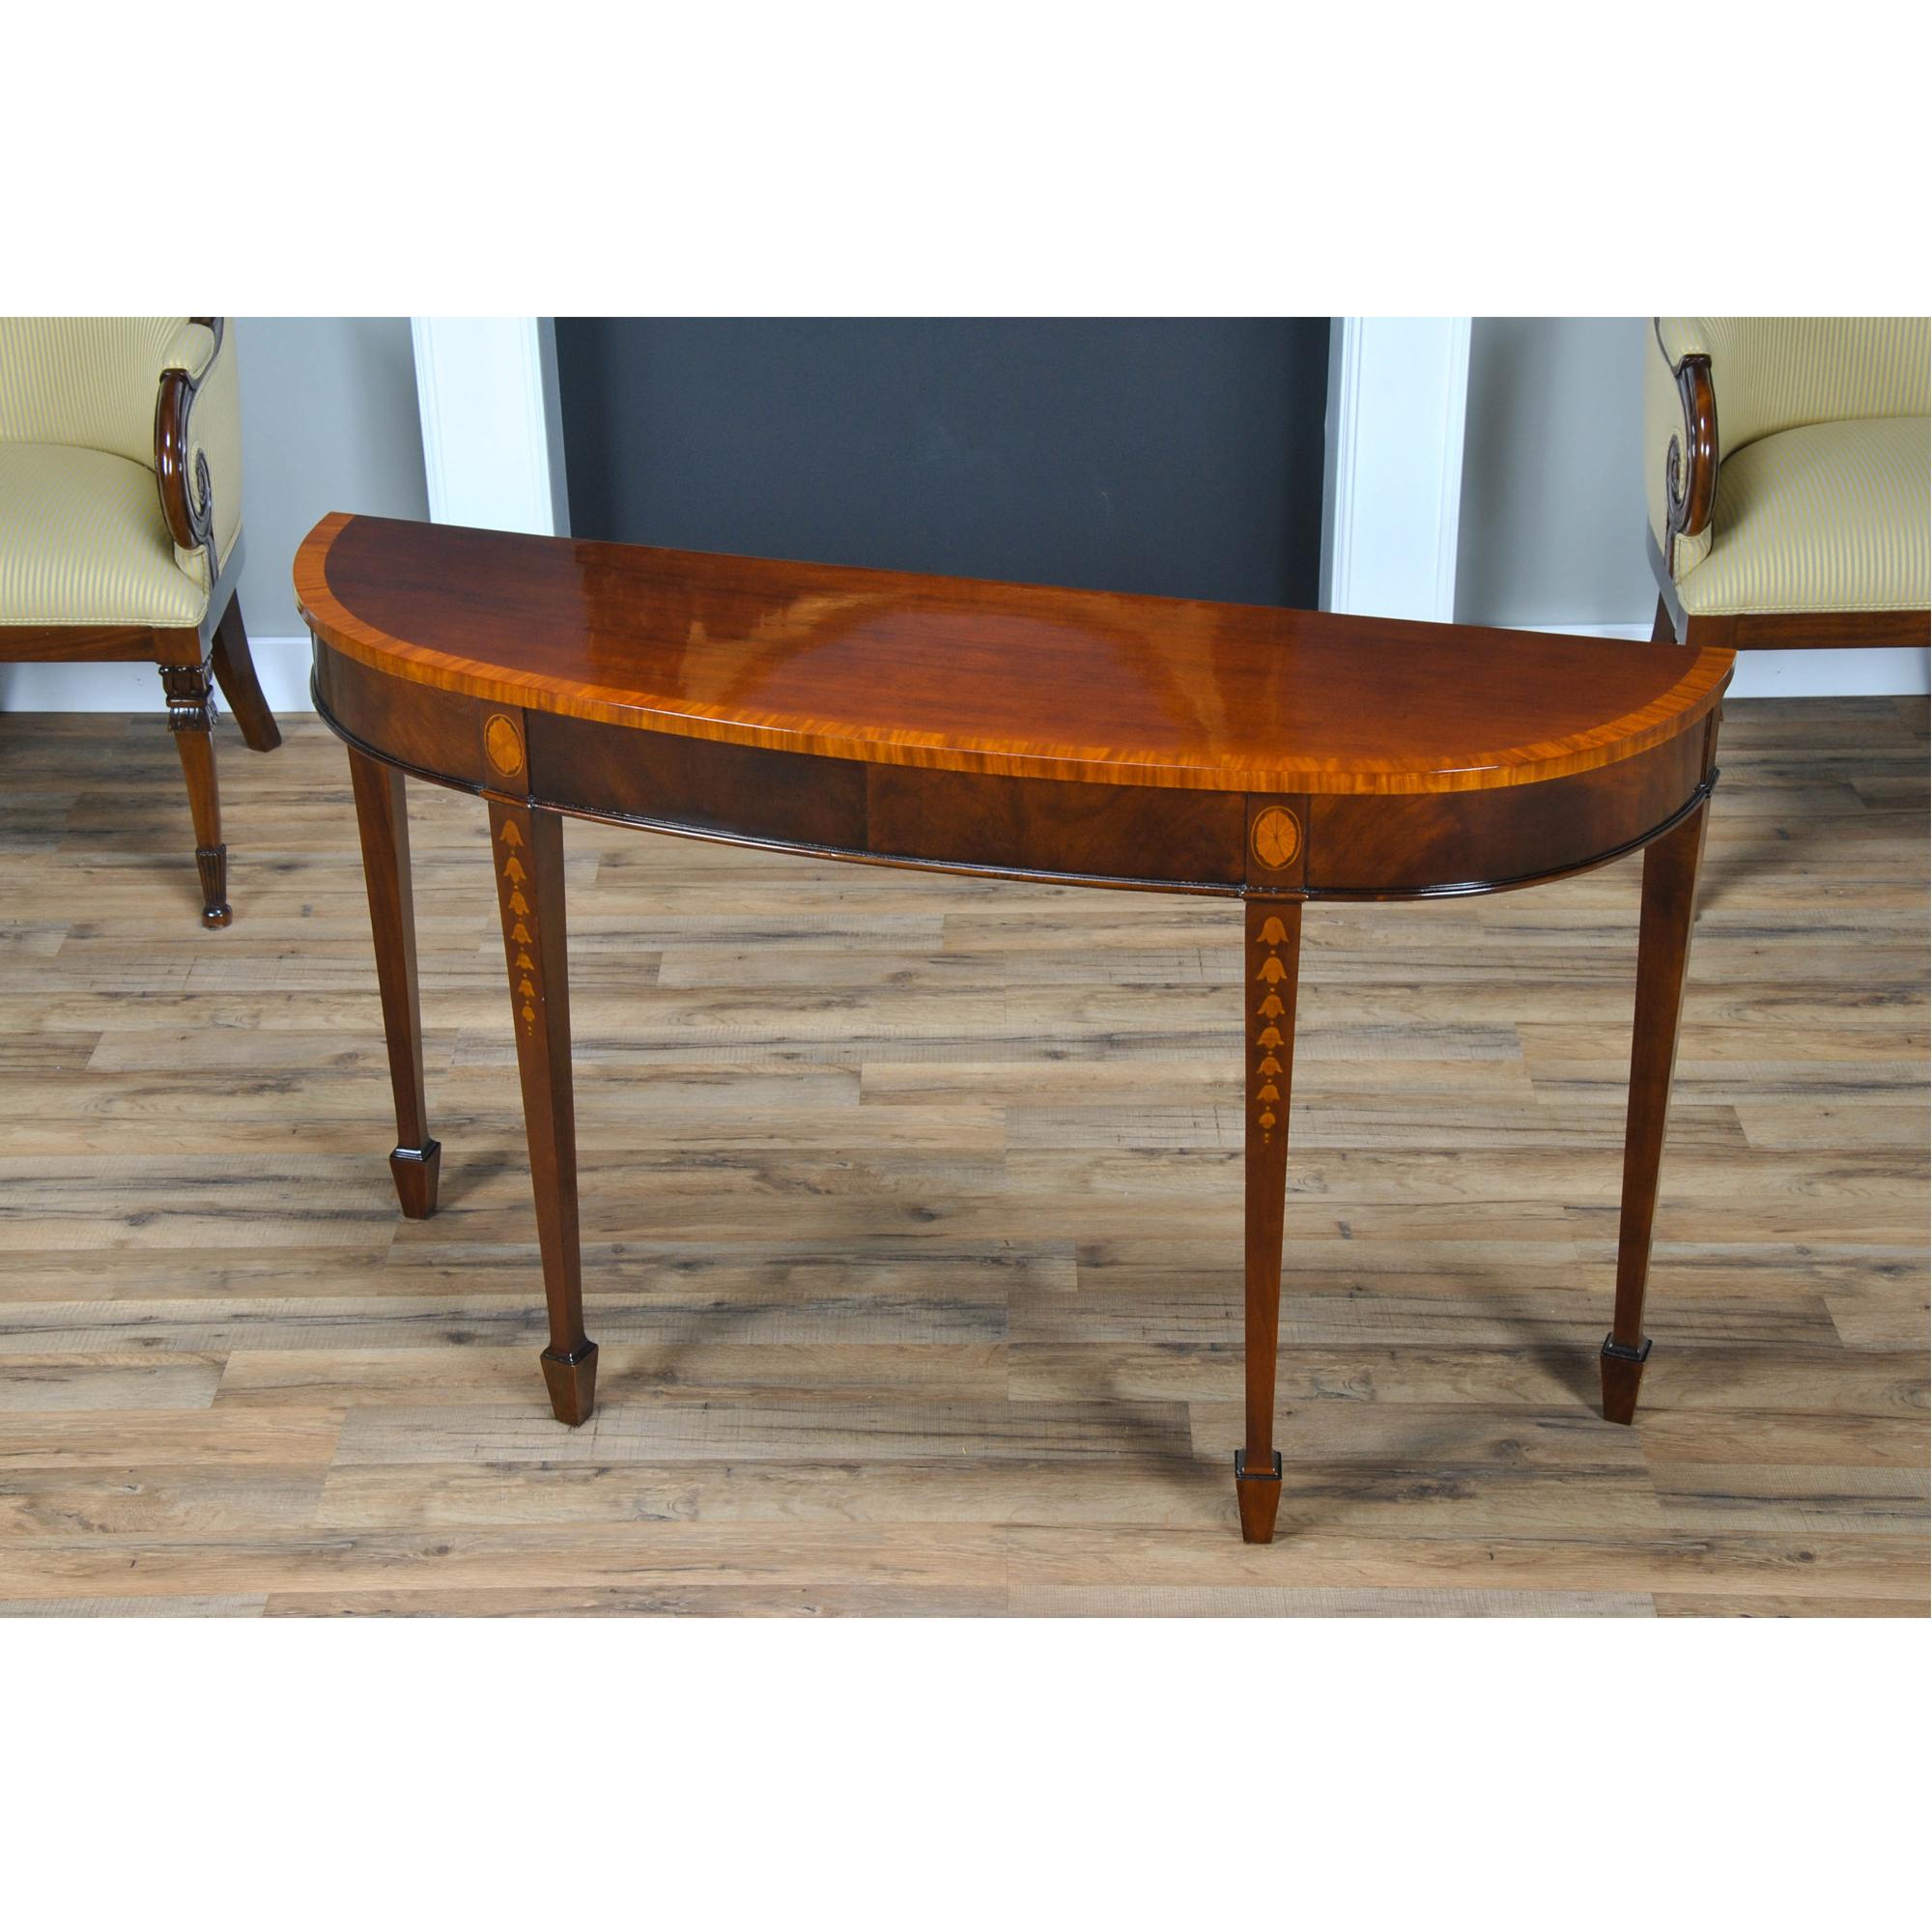 Designed after an English antique, this high quality Mahogany Inlaid Console makes elaborate use of high quality inlays. Drawing inspiration in design from the famous English Cabinet maker George Hepplewhite the console is narrow enough to be used